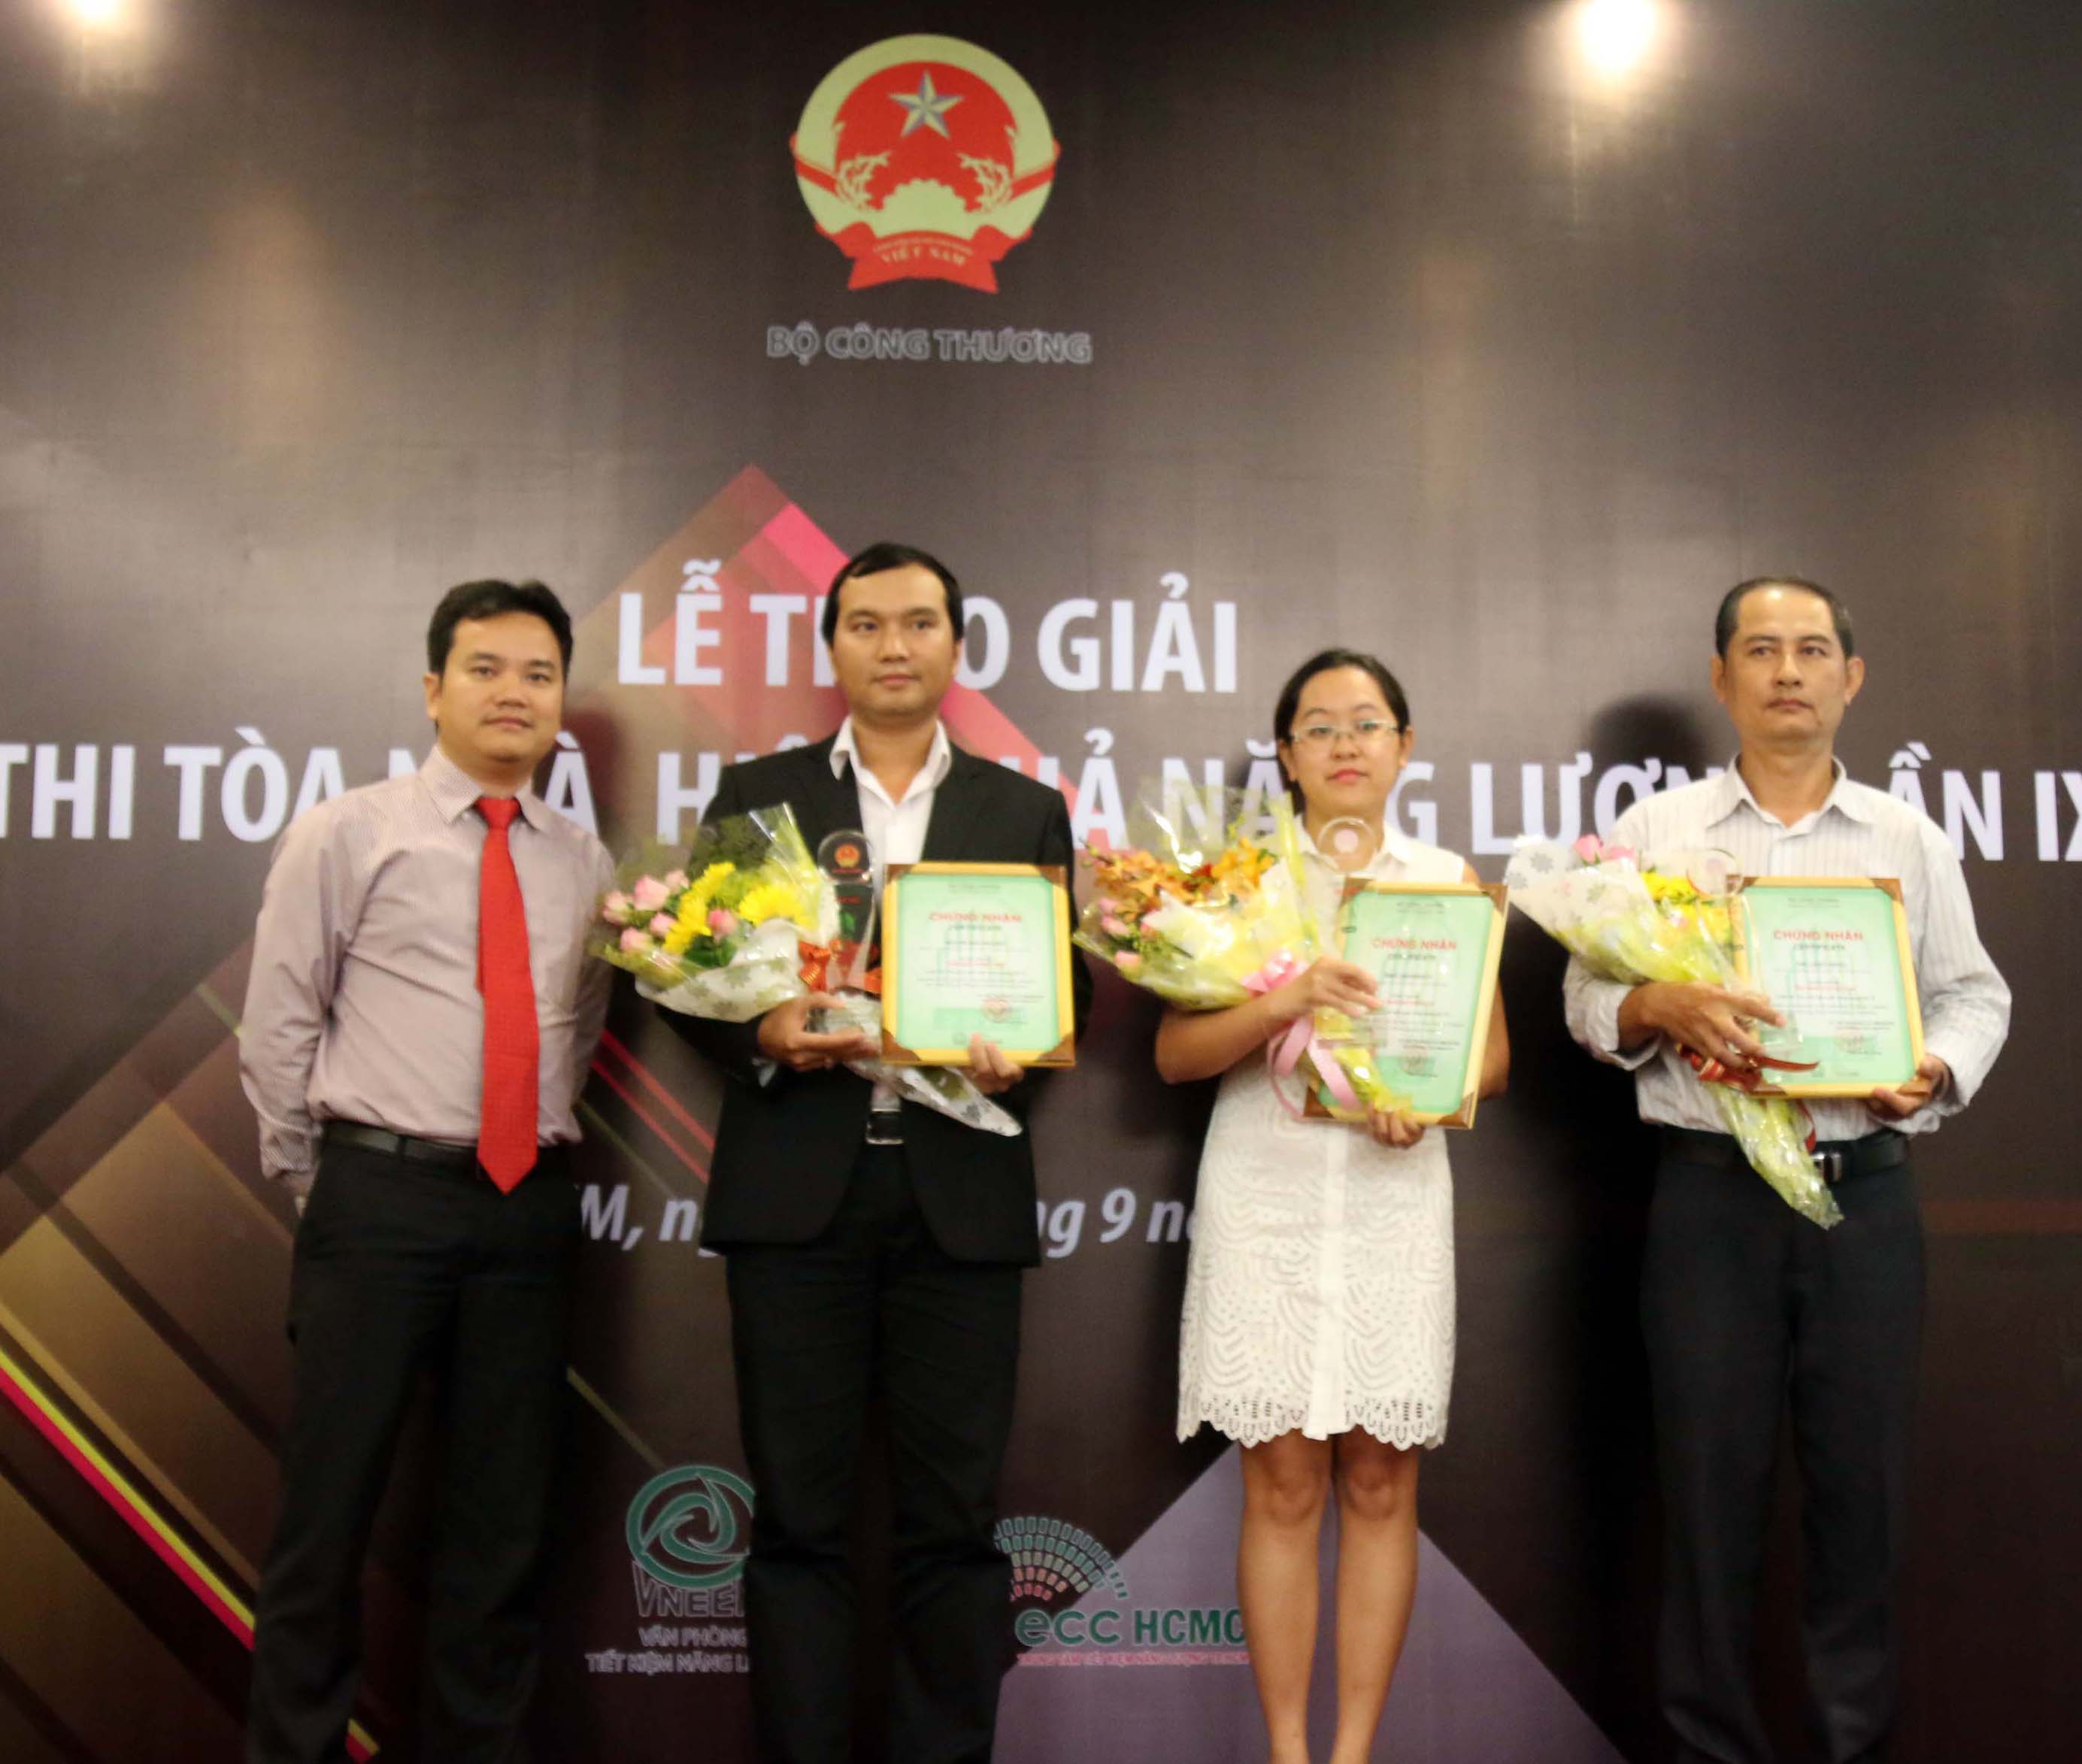 RMIT Vietnam's Contract Services Manager Nguyen Ngoc Bao Tran (middle) accepts the award at the 9th Energy Efficiency Building Awards.